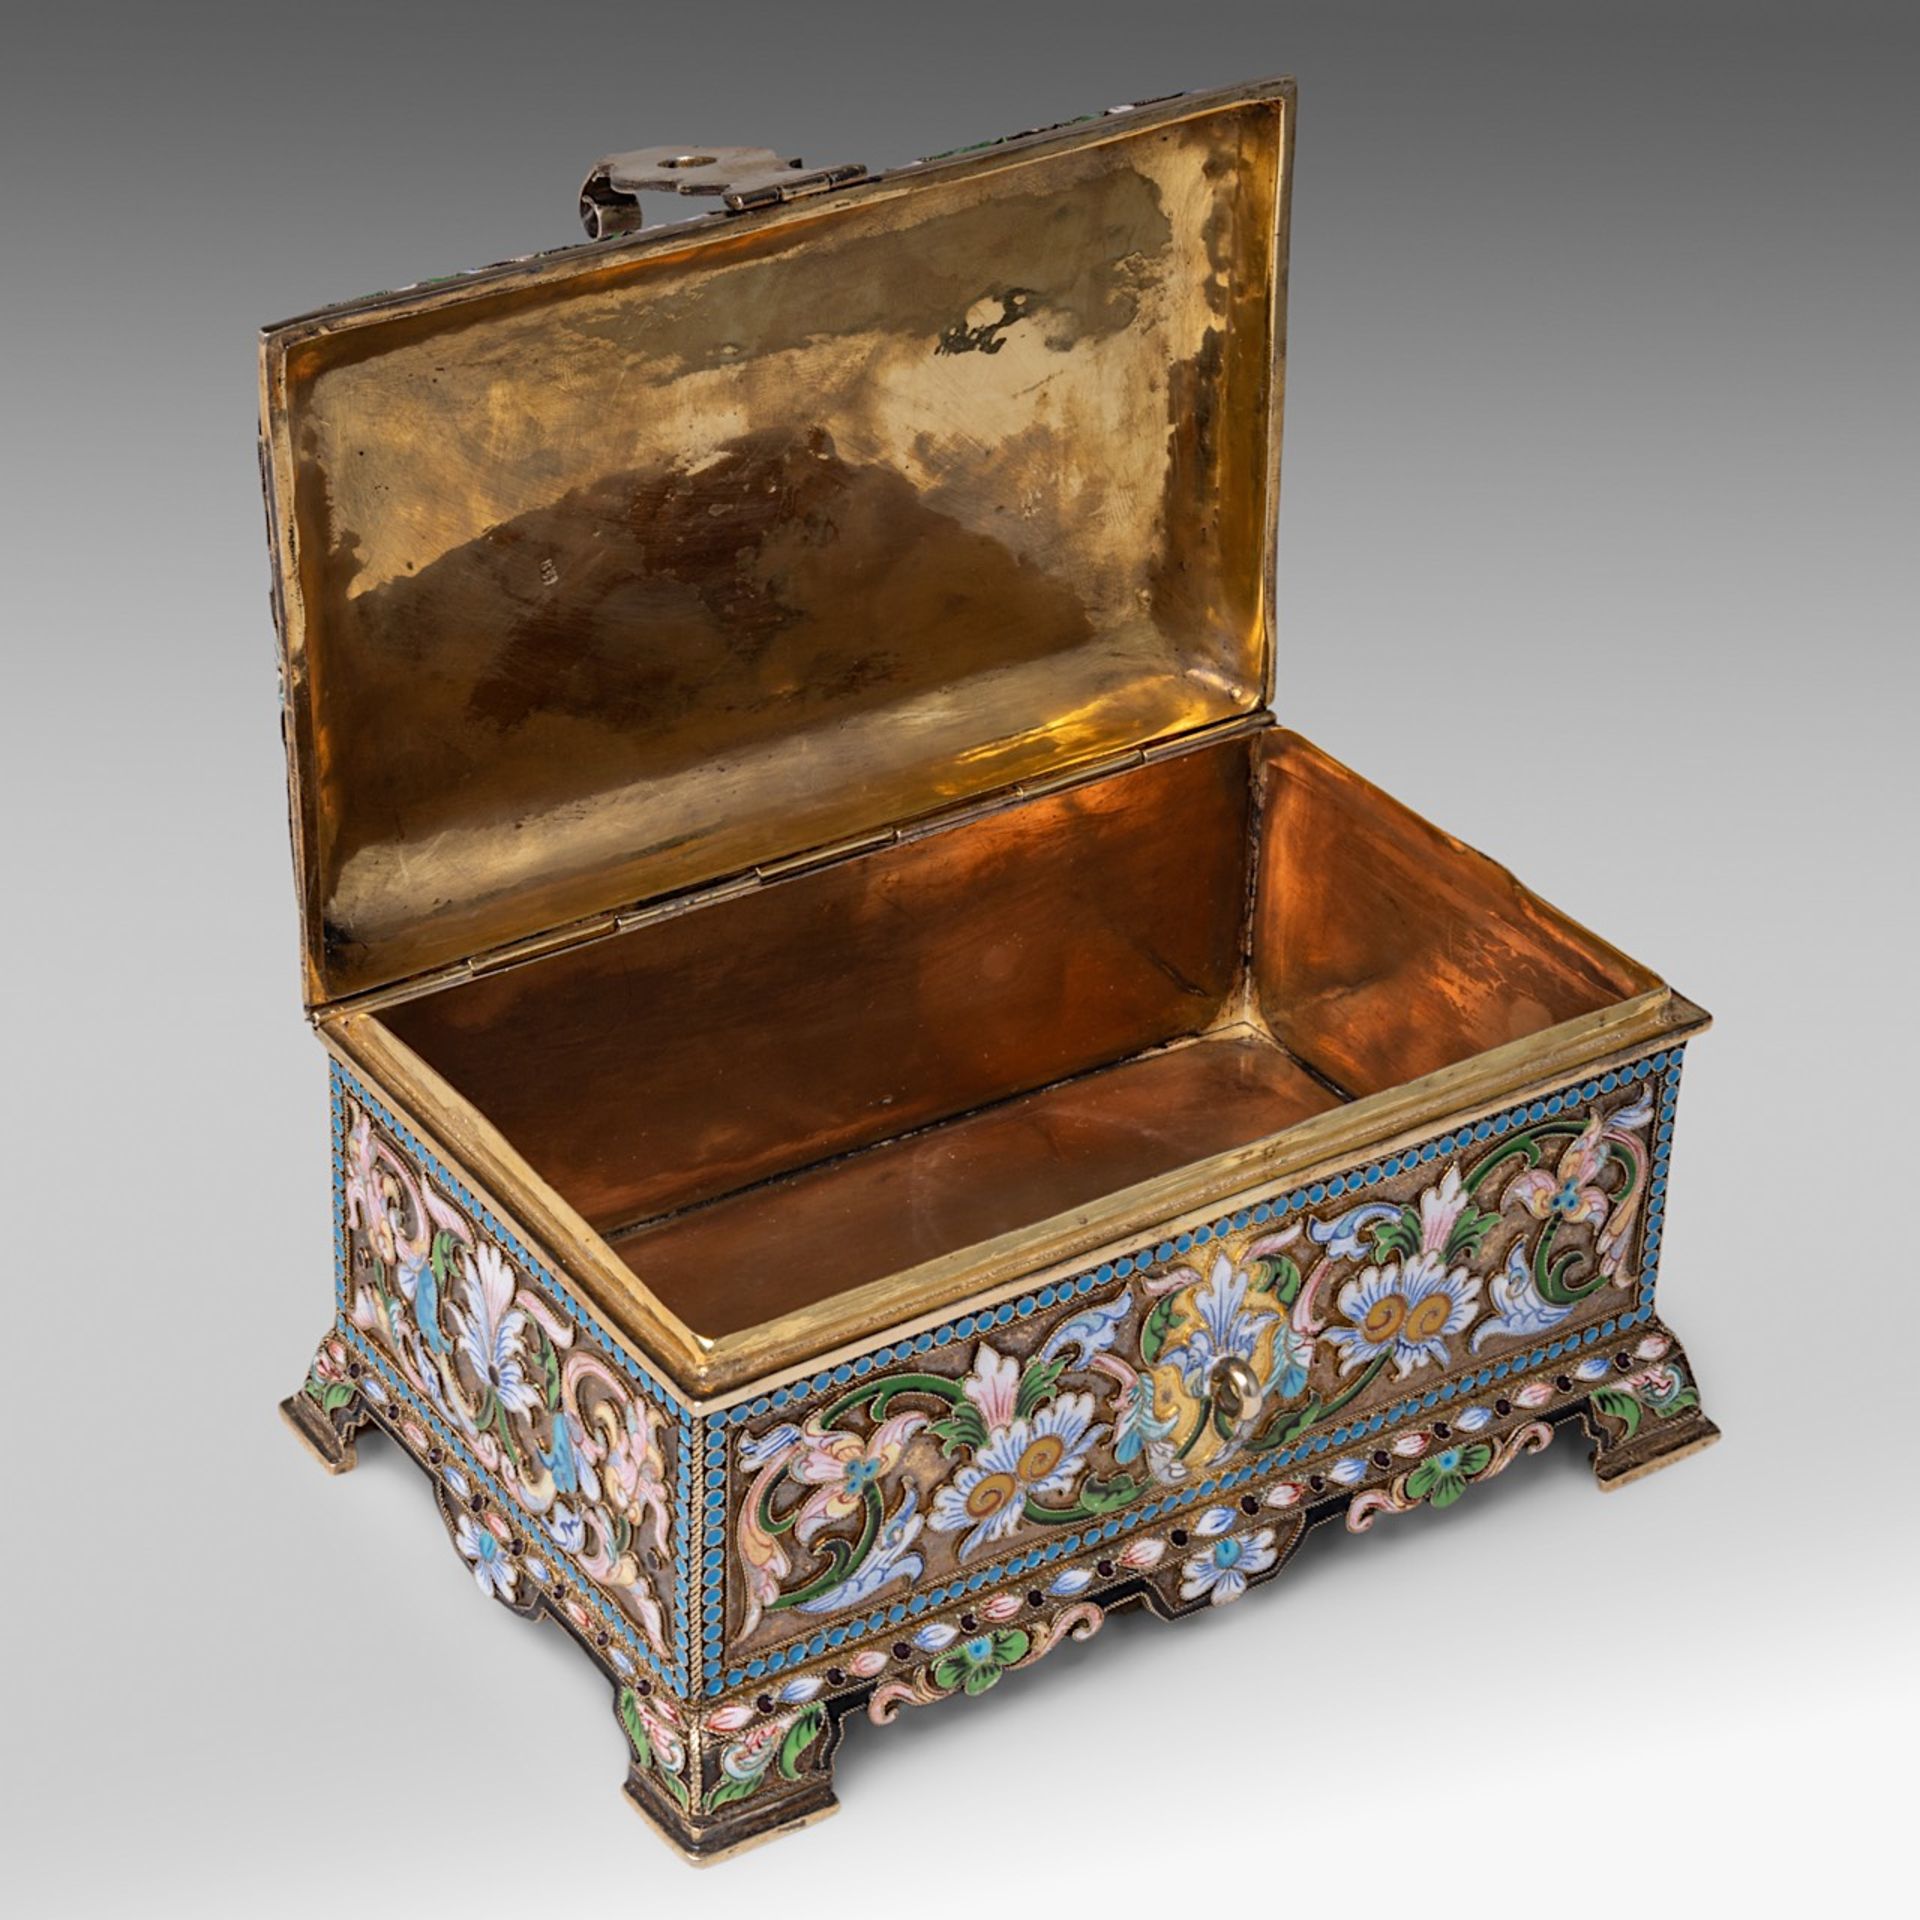 A Russian silver and enamel floral decorated jewellery box, hallmarked 84 Zolotniki, H 8 - 15 - 10 c - Image 9 of 9